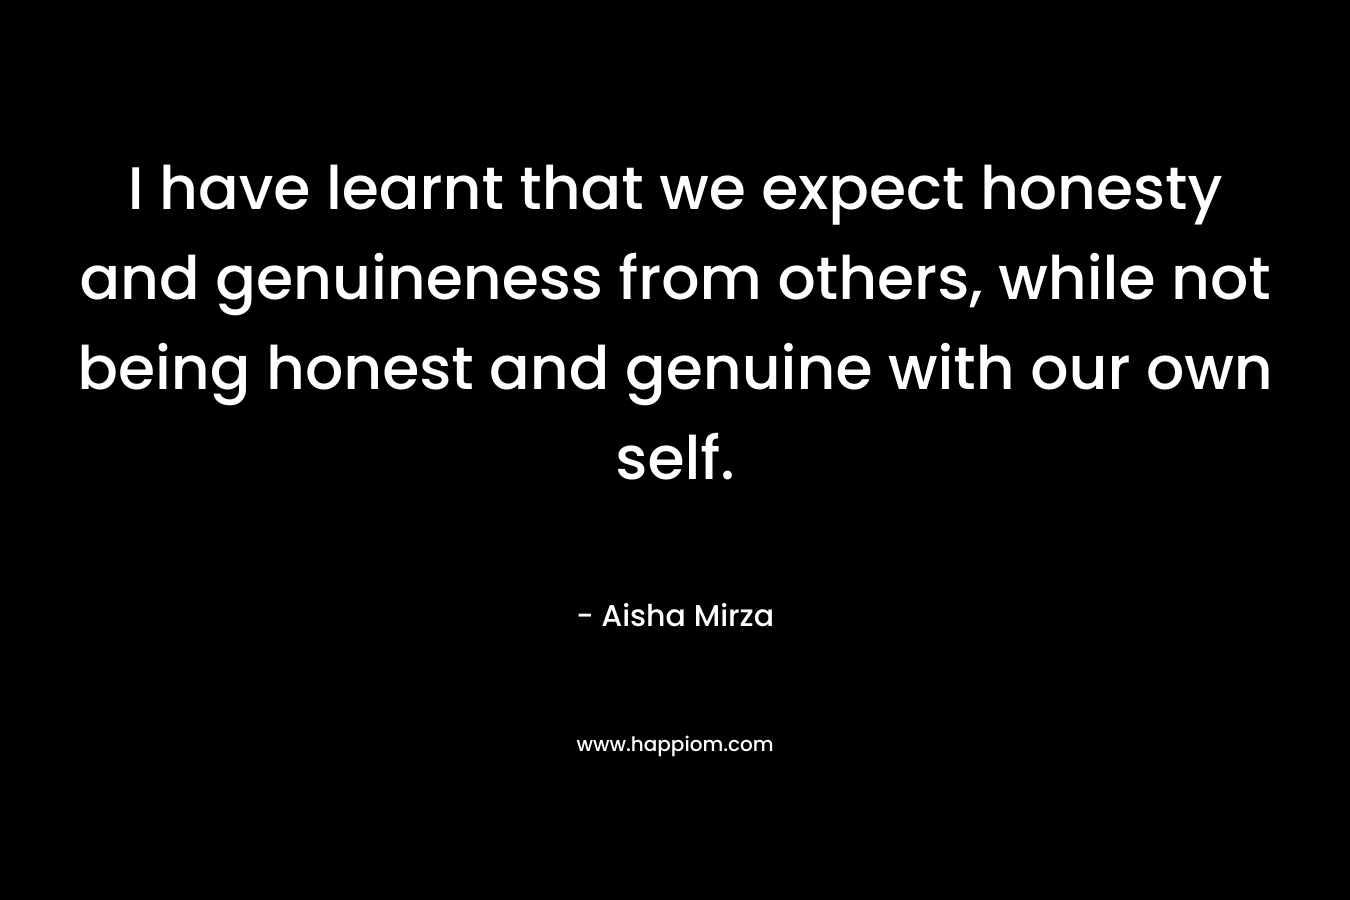 I have learnt that we expect honesty and genuineness from others, while not being honest and genuine with our own self. – Aisha Mirza